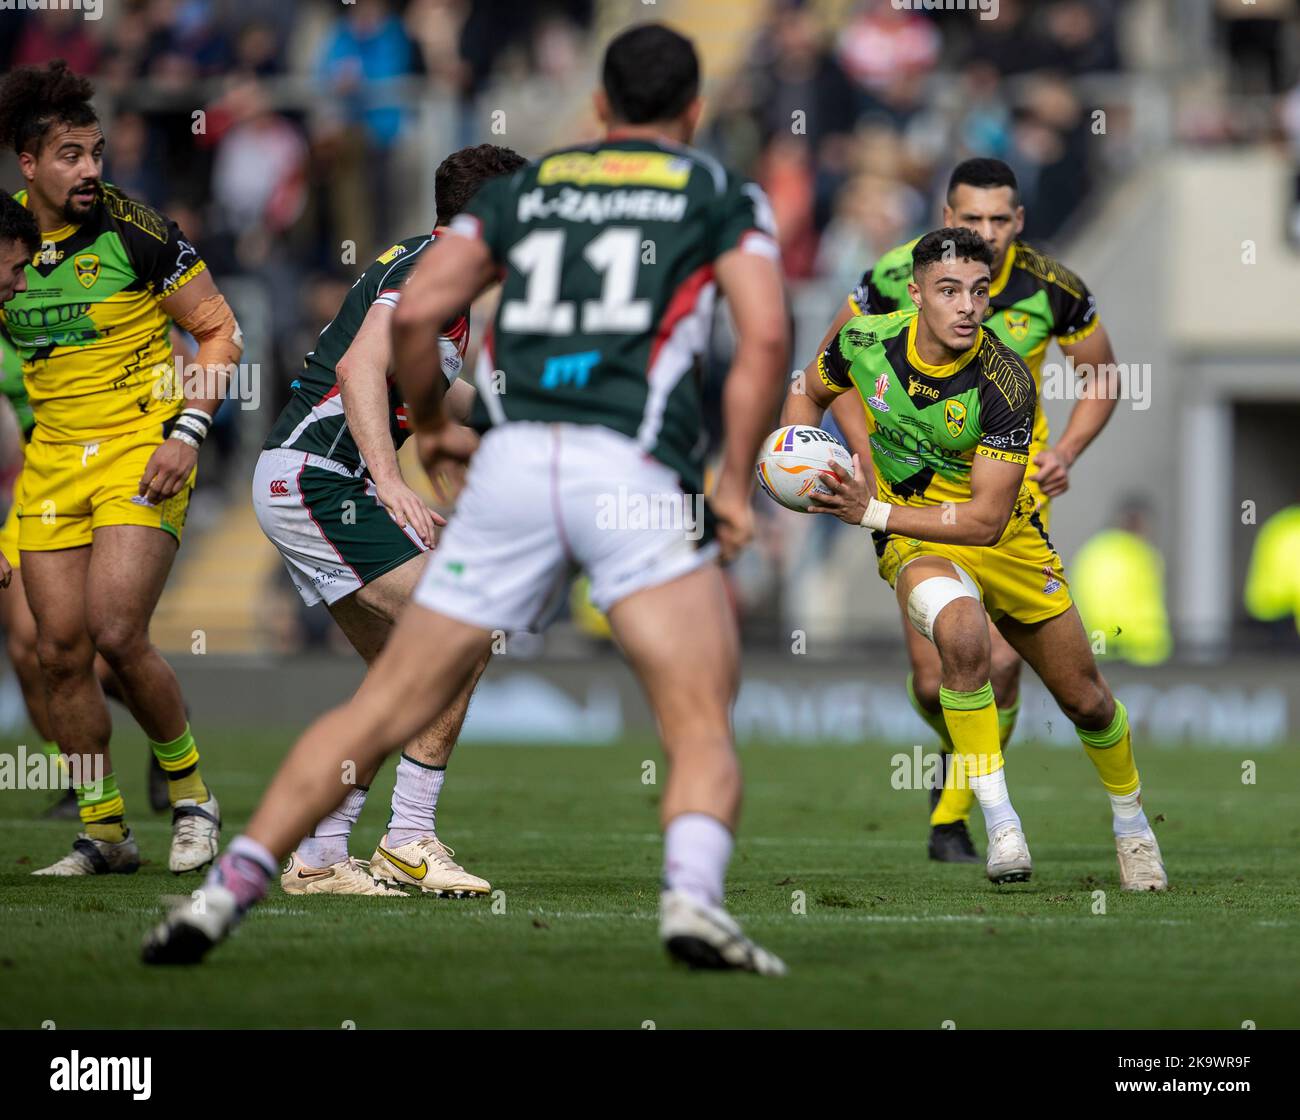 30th October 2022; Leigh Sports Village, Leigh, Greater Manchester, England Rugby League World Cup Lebanon versus Jamaica James Woodburn-Hall of Jamaica looks to pass the ball Credit Action Plus Sports Images/Alamy Live